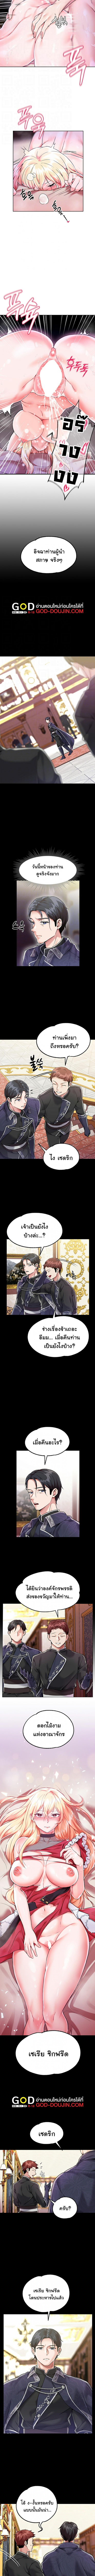 Became Assistant to Villain In RomanceFantasy 3 ภาพที่ 2